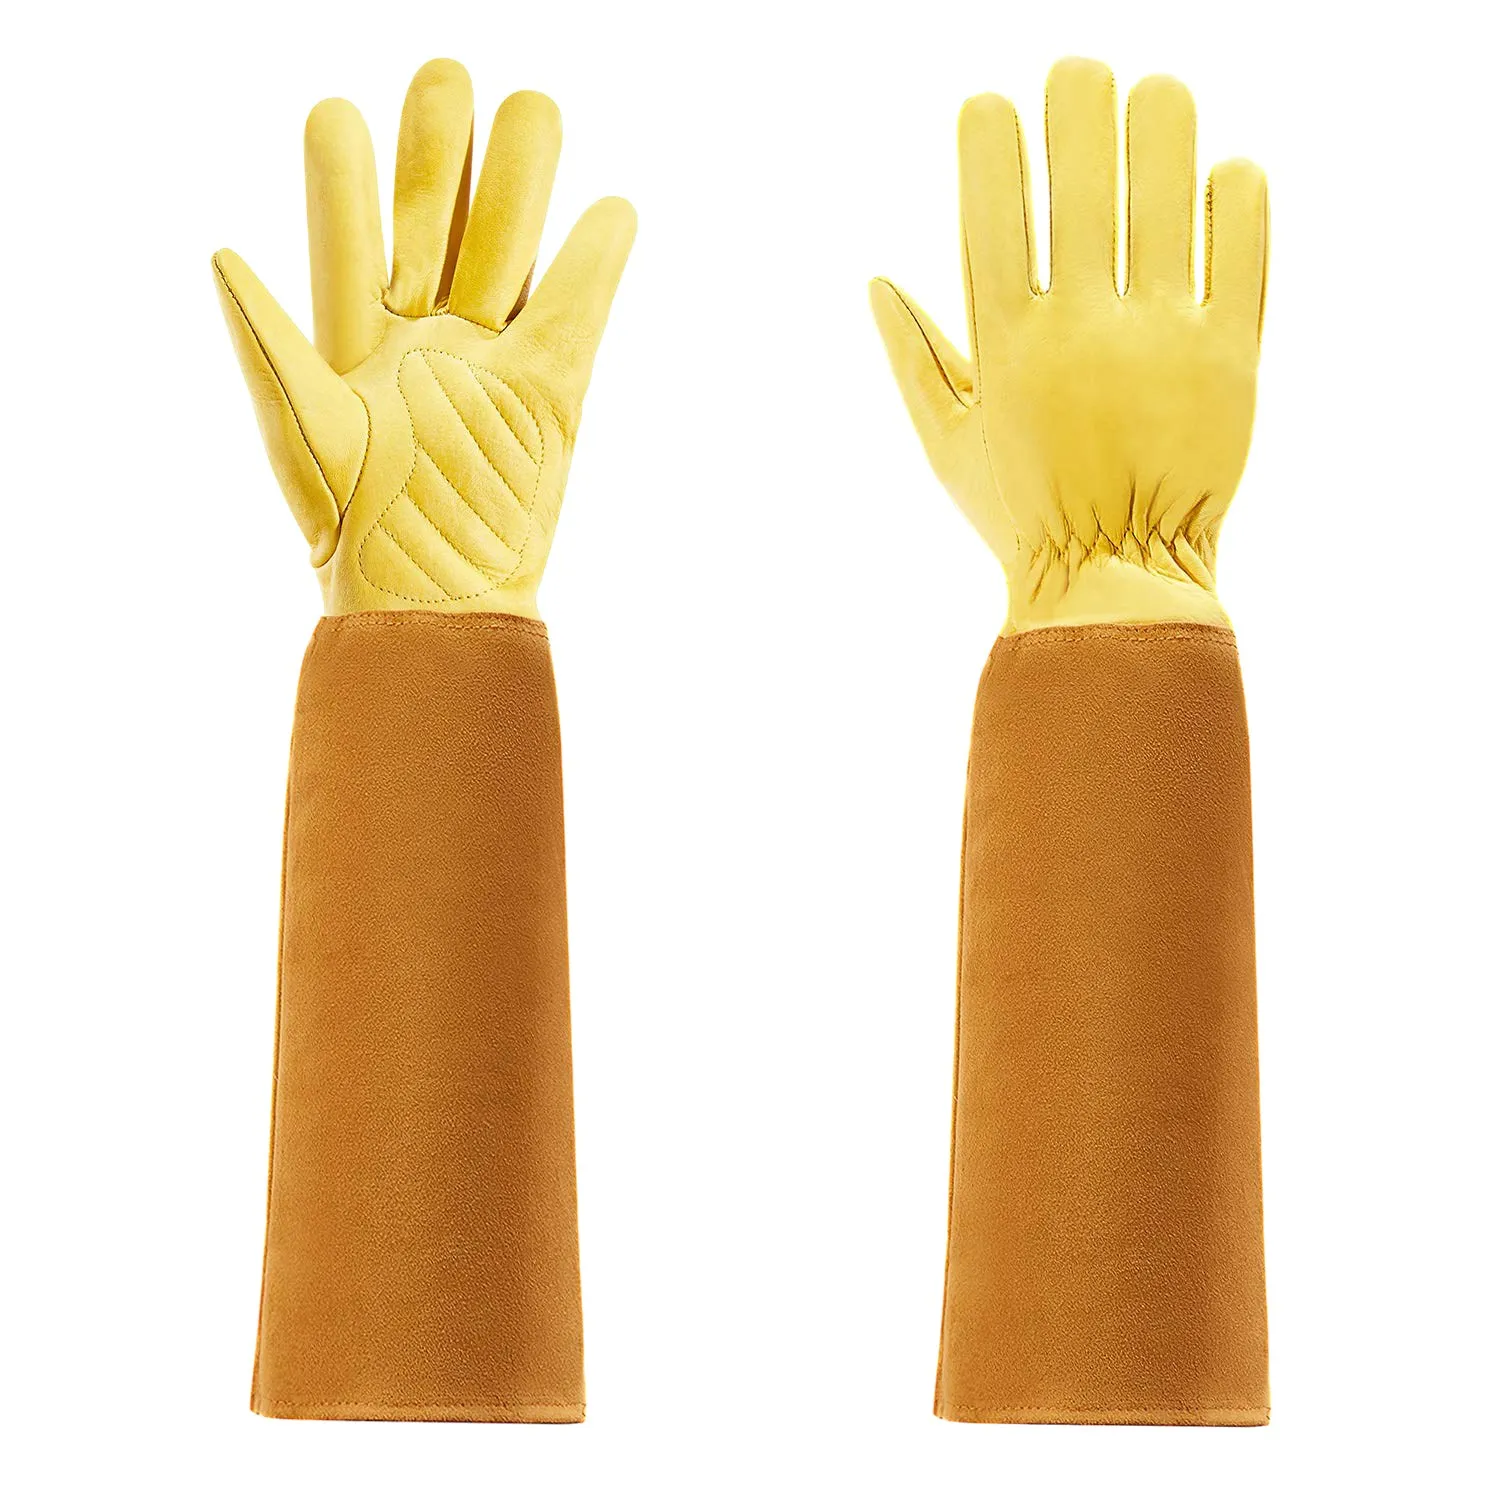 

Gardening Gloves for Women and Men Thron Proof Rose Pruning Cow Leather Gloves with Long Forearm Protection Gauntlet-S